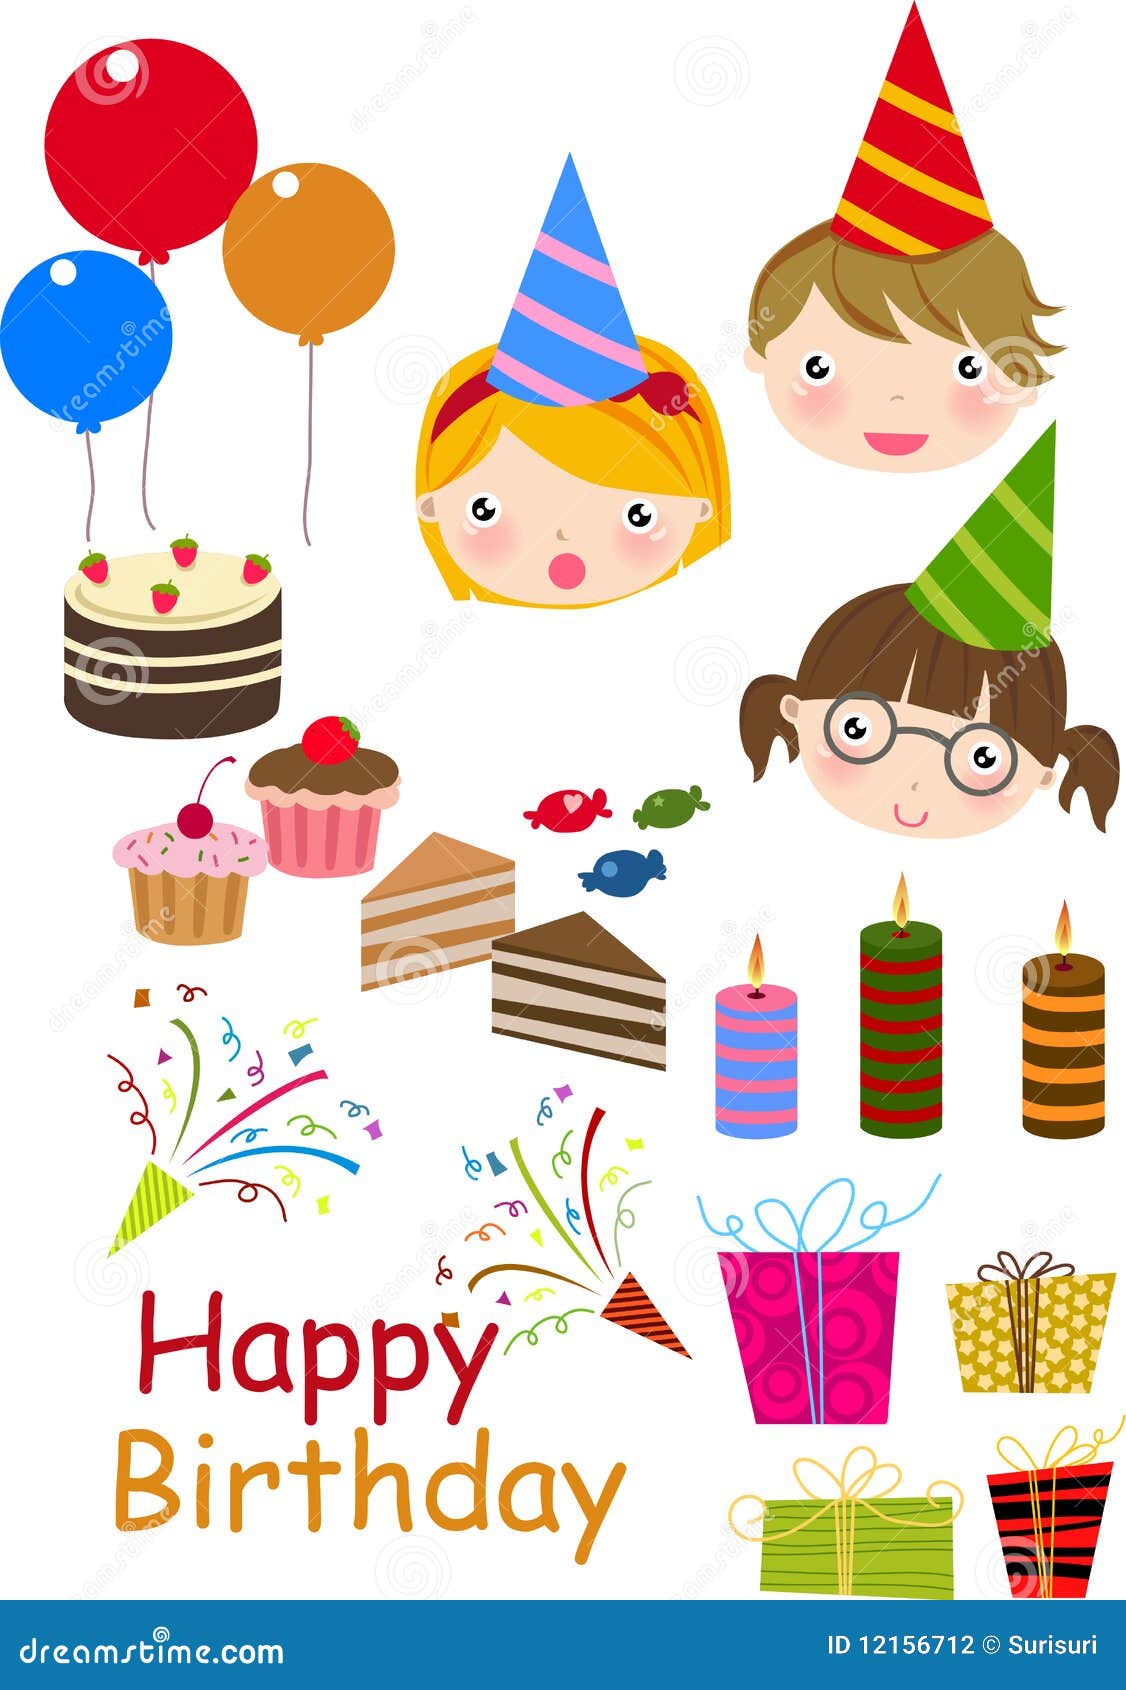 everything-you-need-for-a-birthday-party-stock-vector-illustration-of